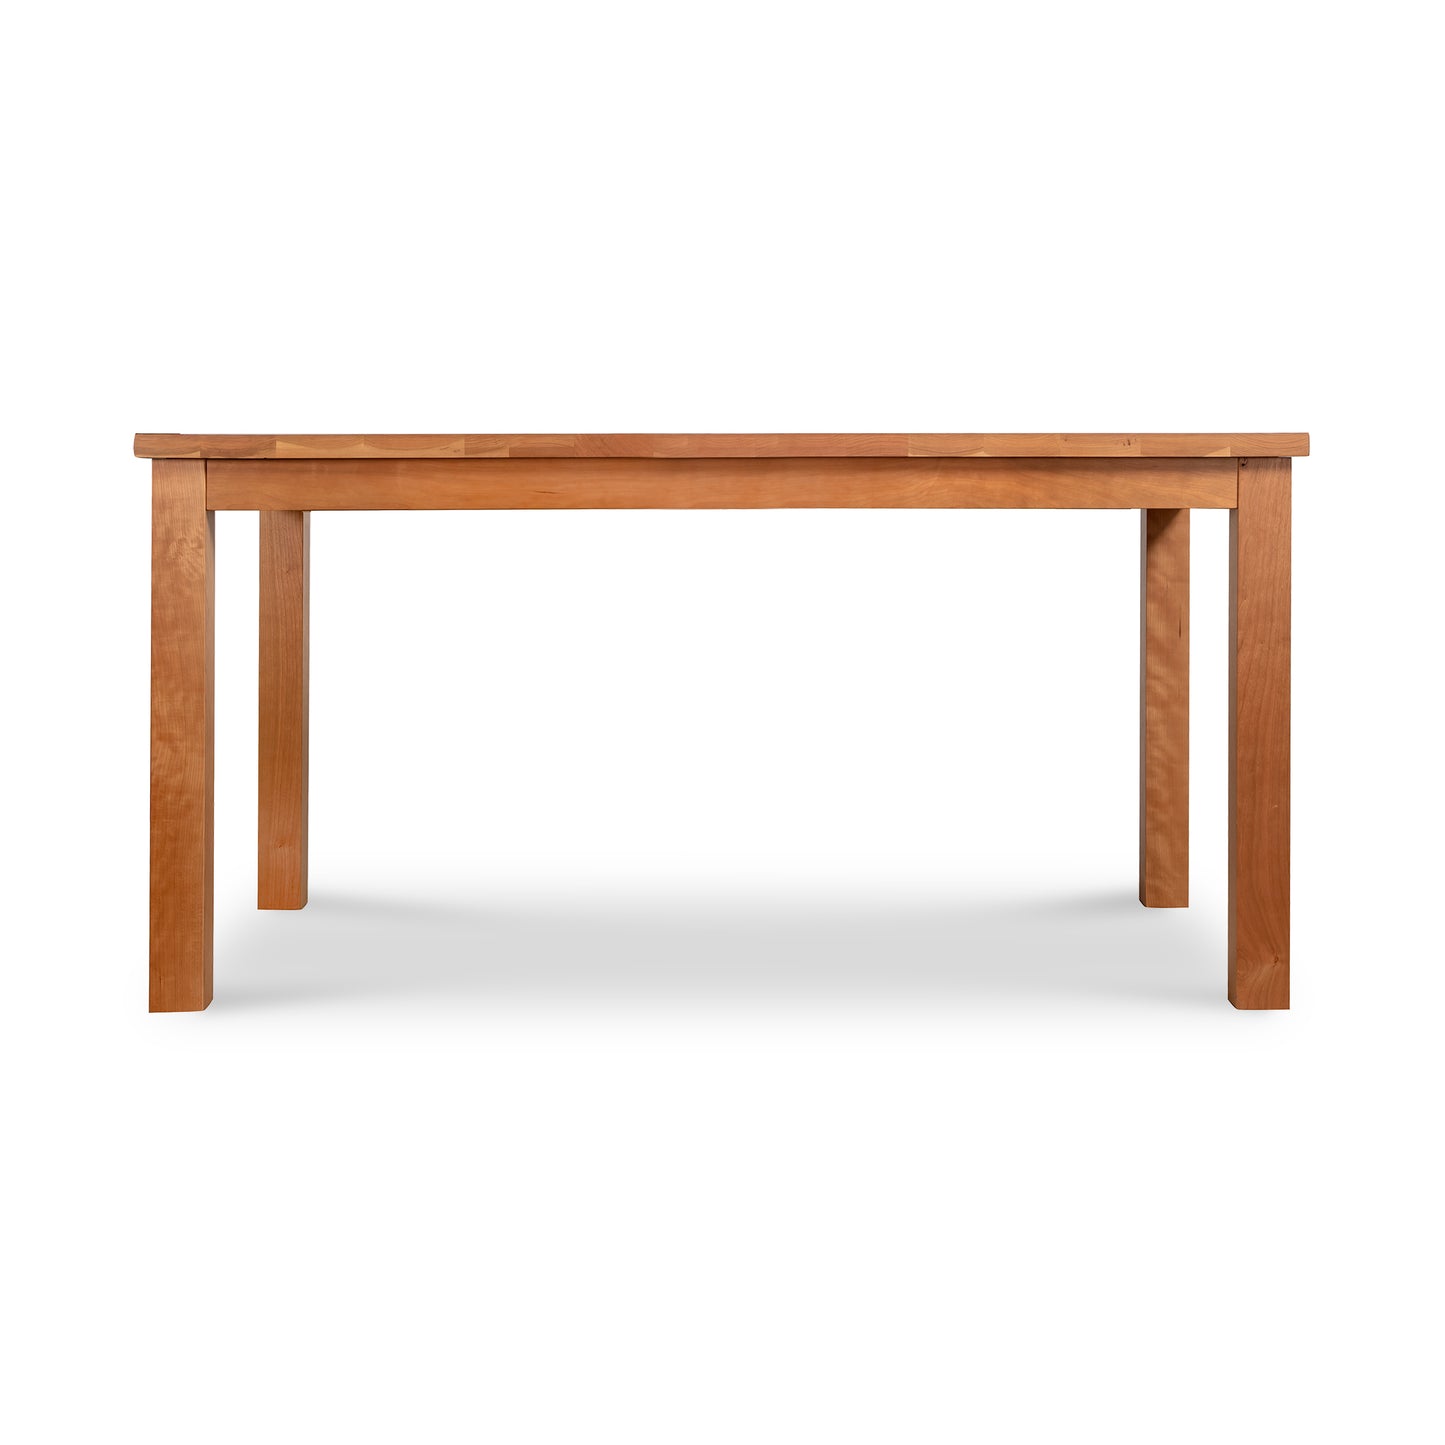 An eco-friendly Lyndon Furniture Modern Mission Parsons Solid Top Table on a white background, crafted from sustainable harvested woods.